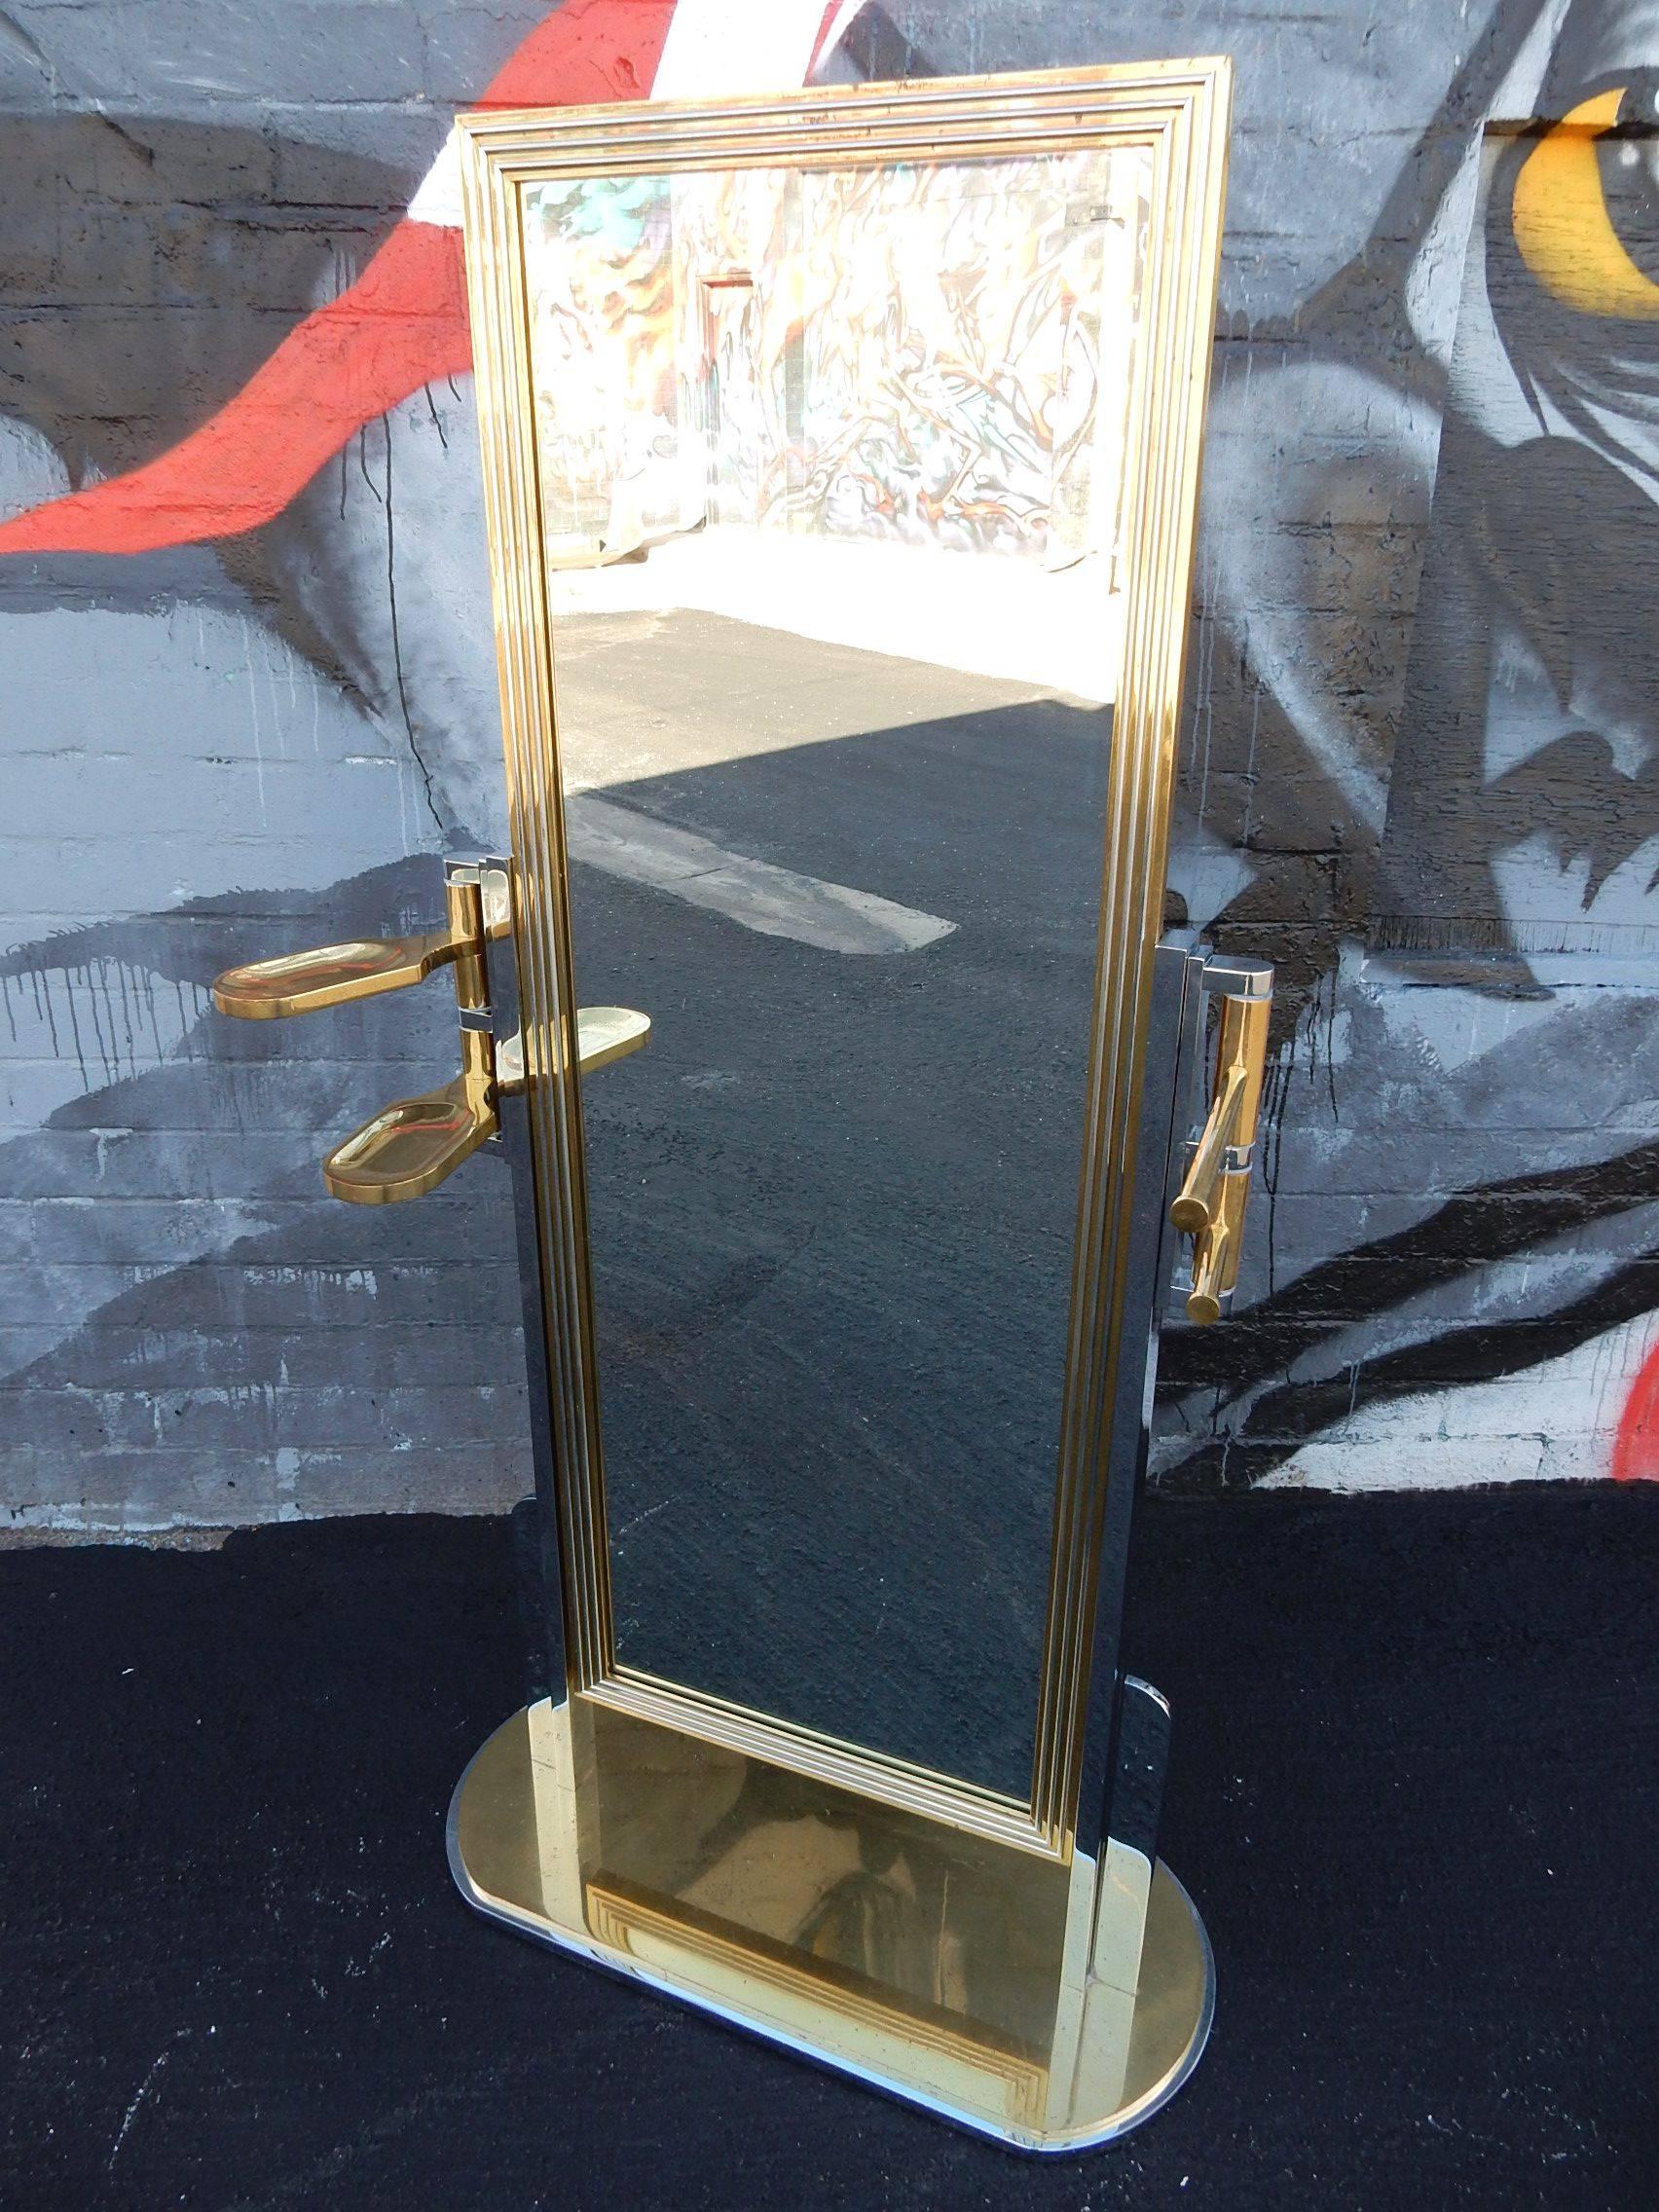 Incredible solid brass and chromed steel full length dressing mirror with side holders for cuff links, pants, belt etc.
The ultimate Men's valet. Circa 1970's in a classic Art Deco skyscraper style.
Not signed or marked. An outstanding quality